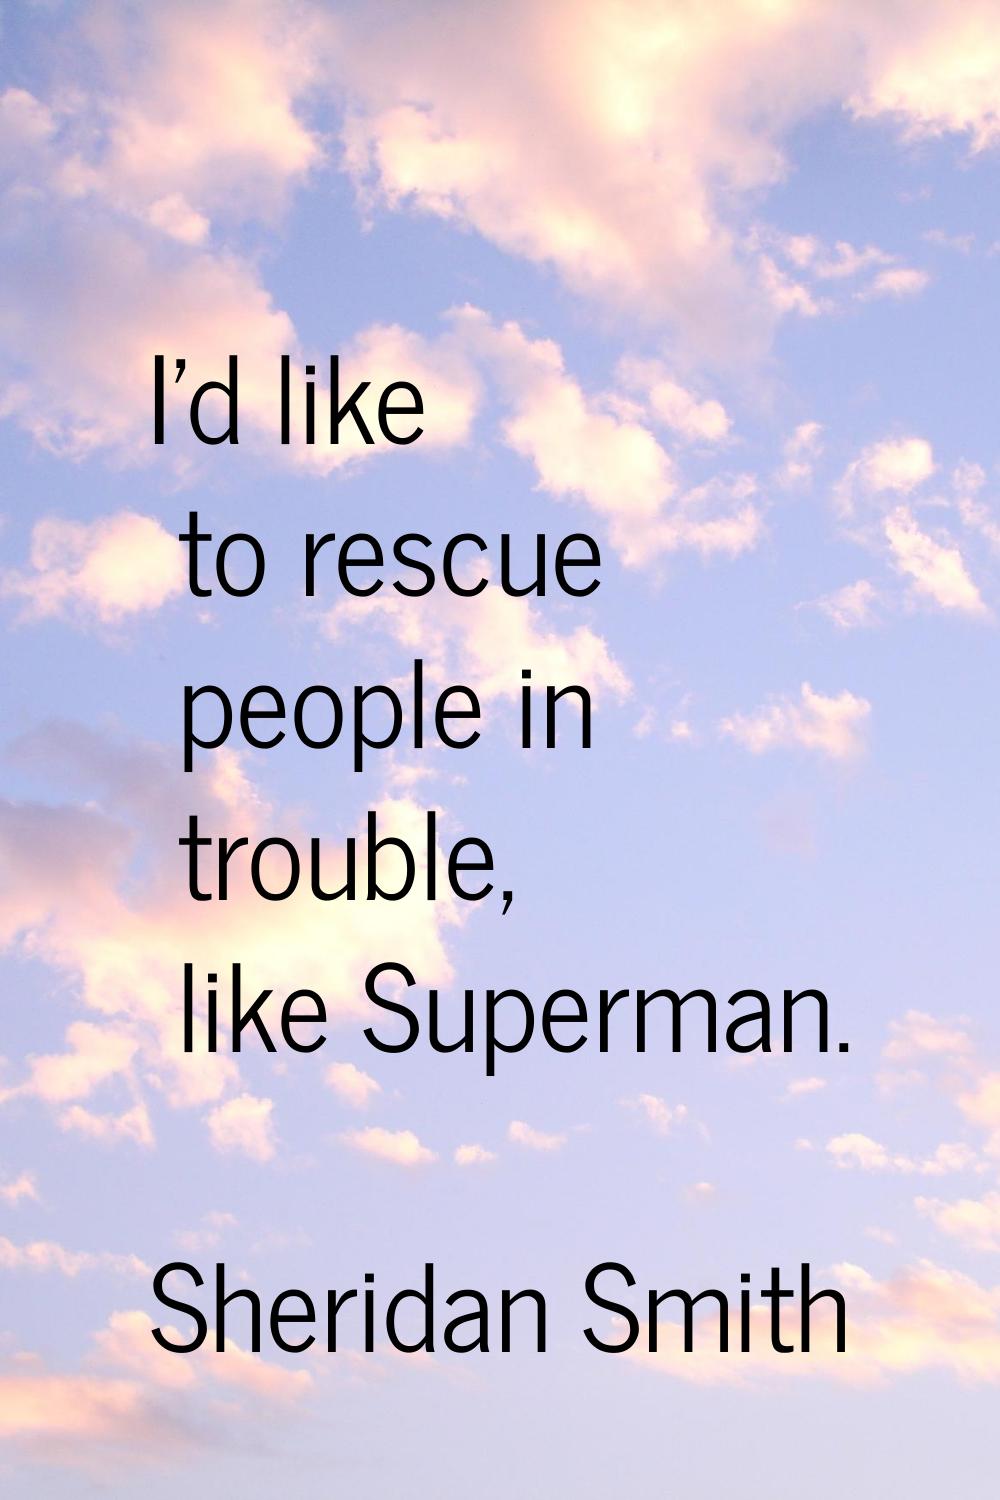 I'd like to rescue people in trouble, like Superman.